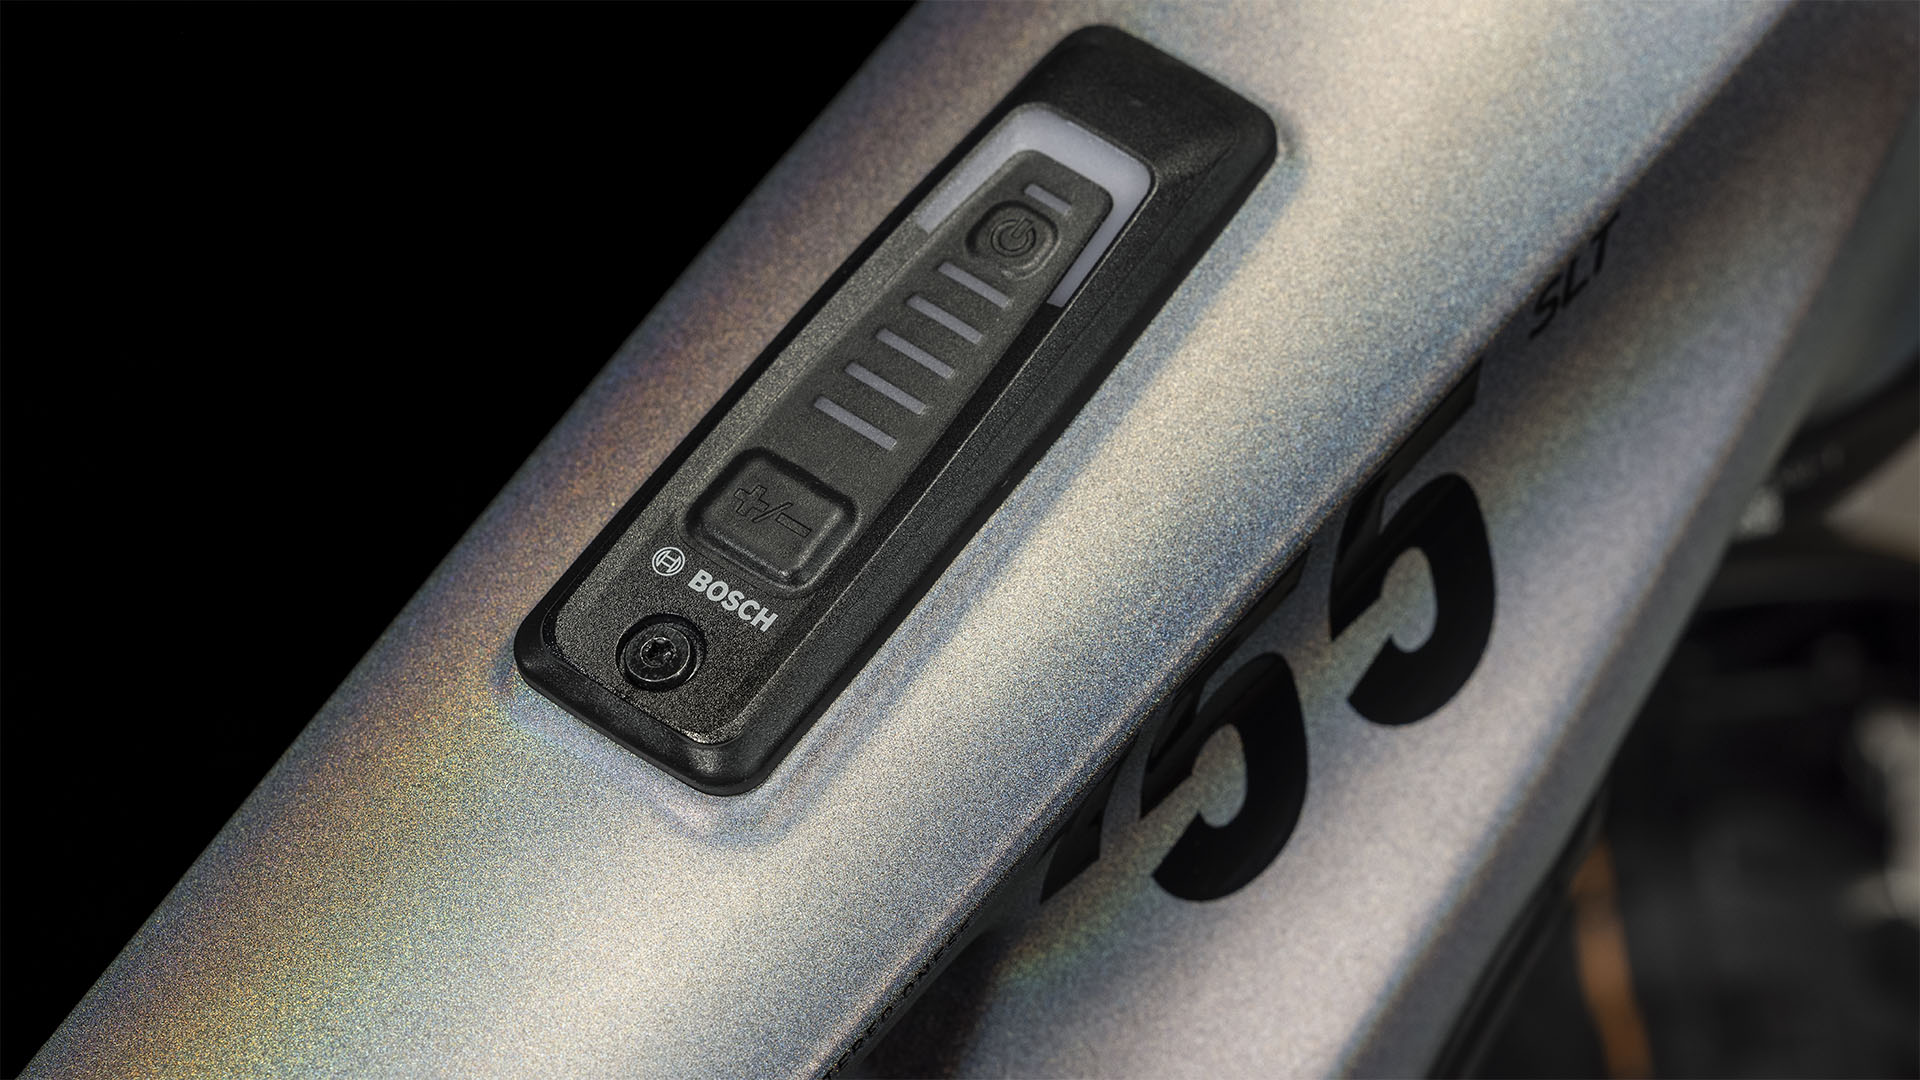 The new Bosch power button and battery indicator